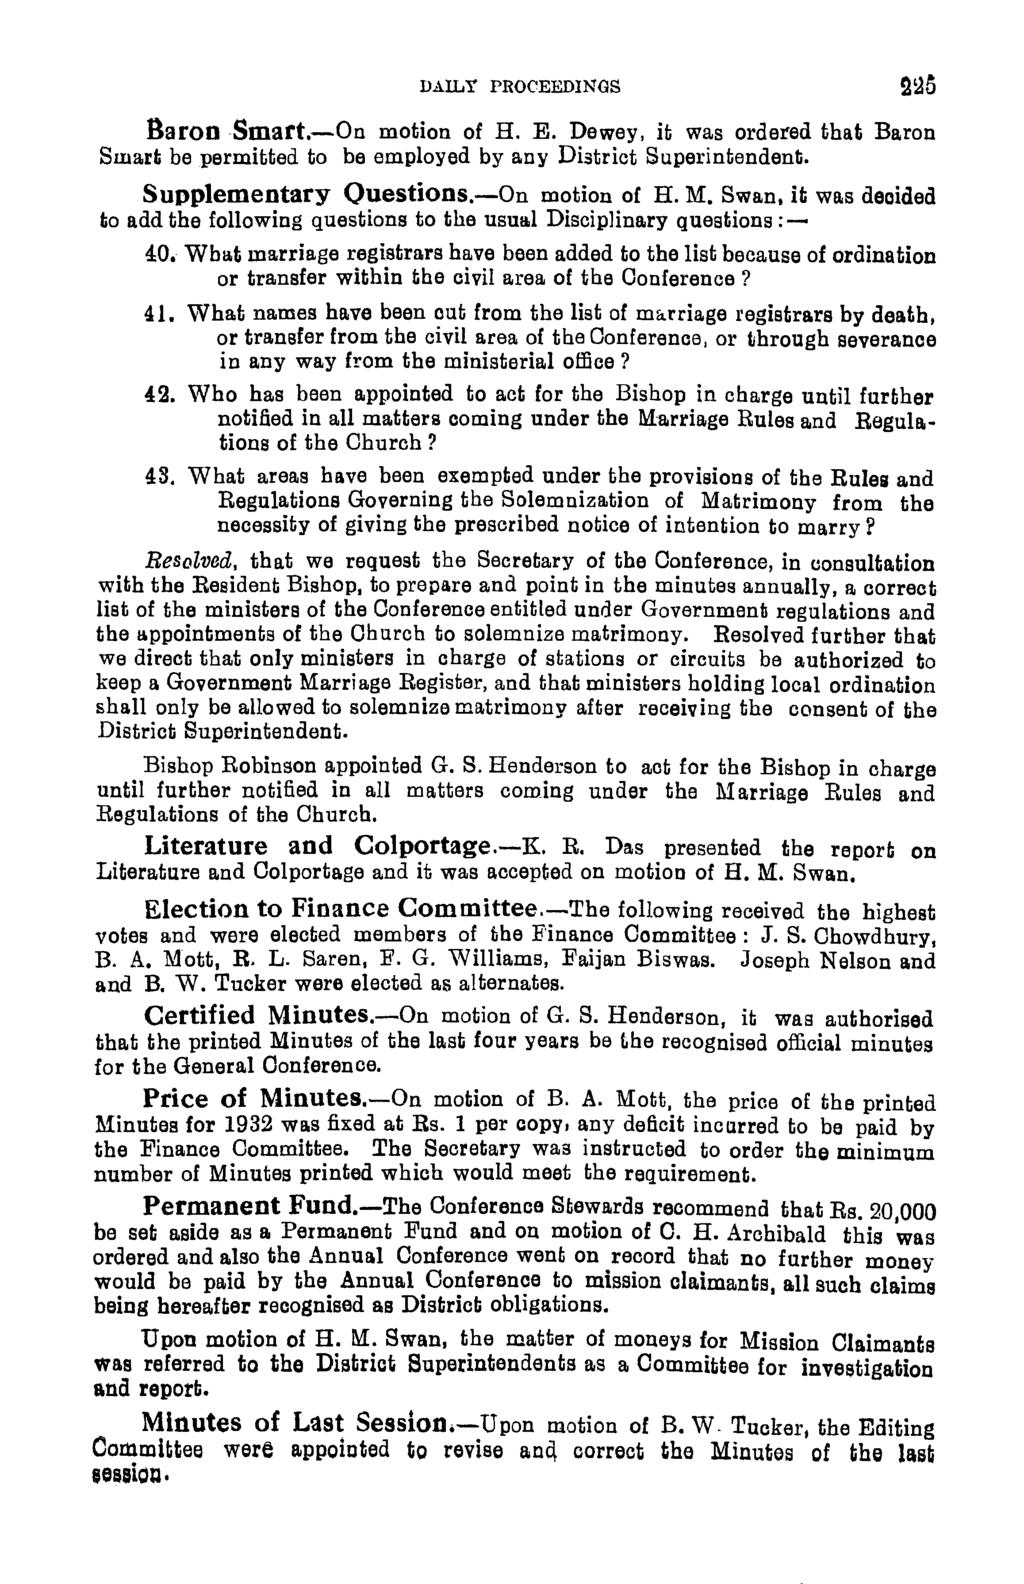 DALY PROCEEDNG~ BaronSmart.-On motion of H. E. Dewey, it was ordered that Baron Swad be permitted to be employed by any District Superintendent. Supplementary Questions.-On motion of H. M. Swan.